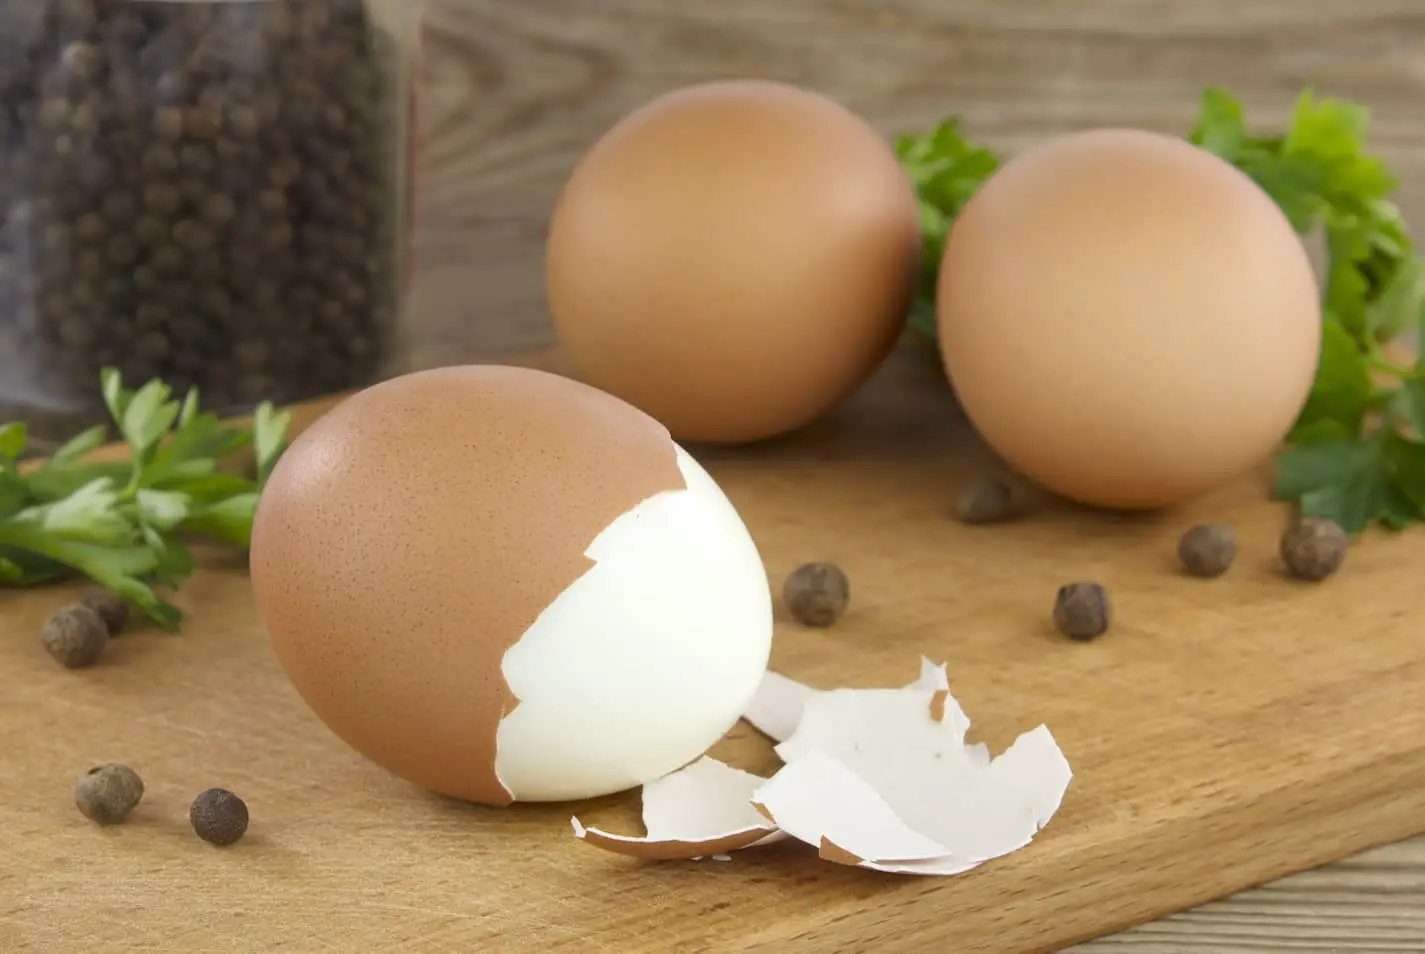 An image of a hard boiled egg on a countertop